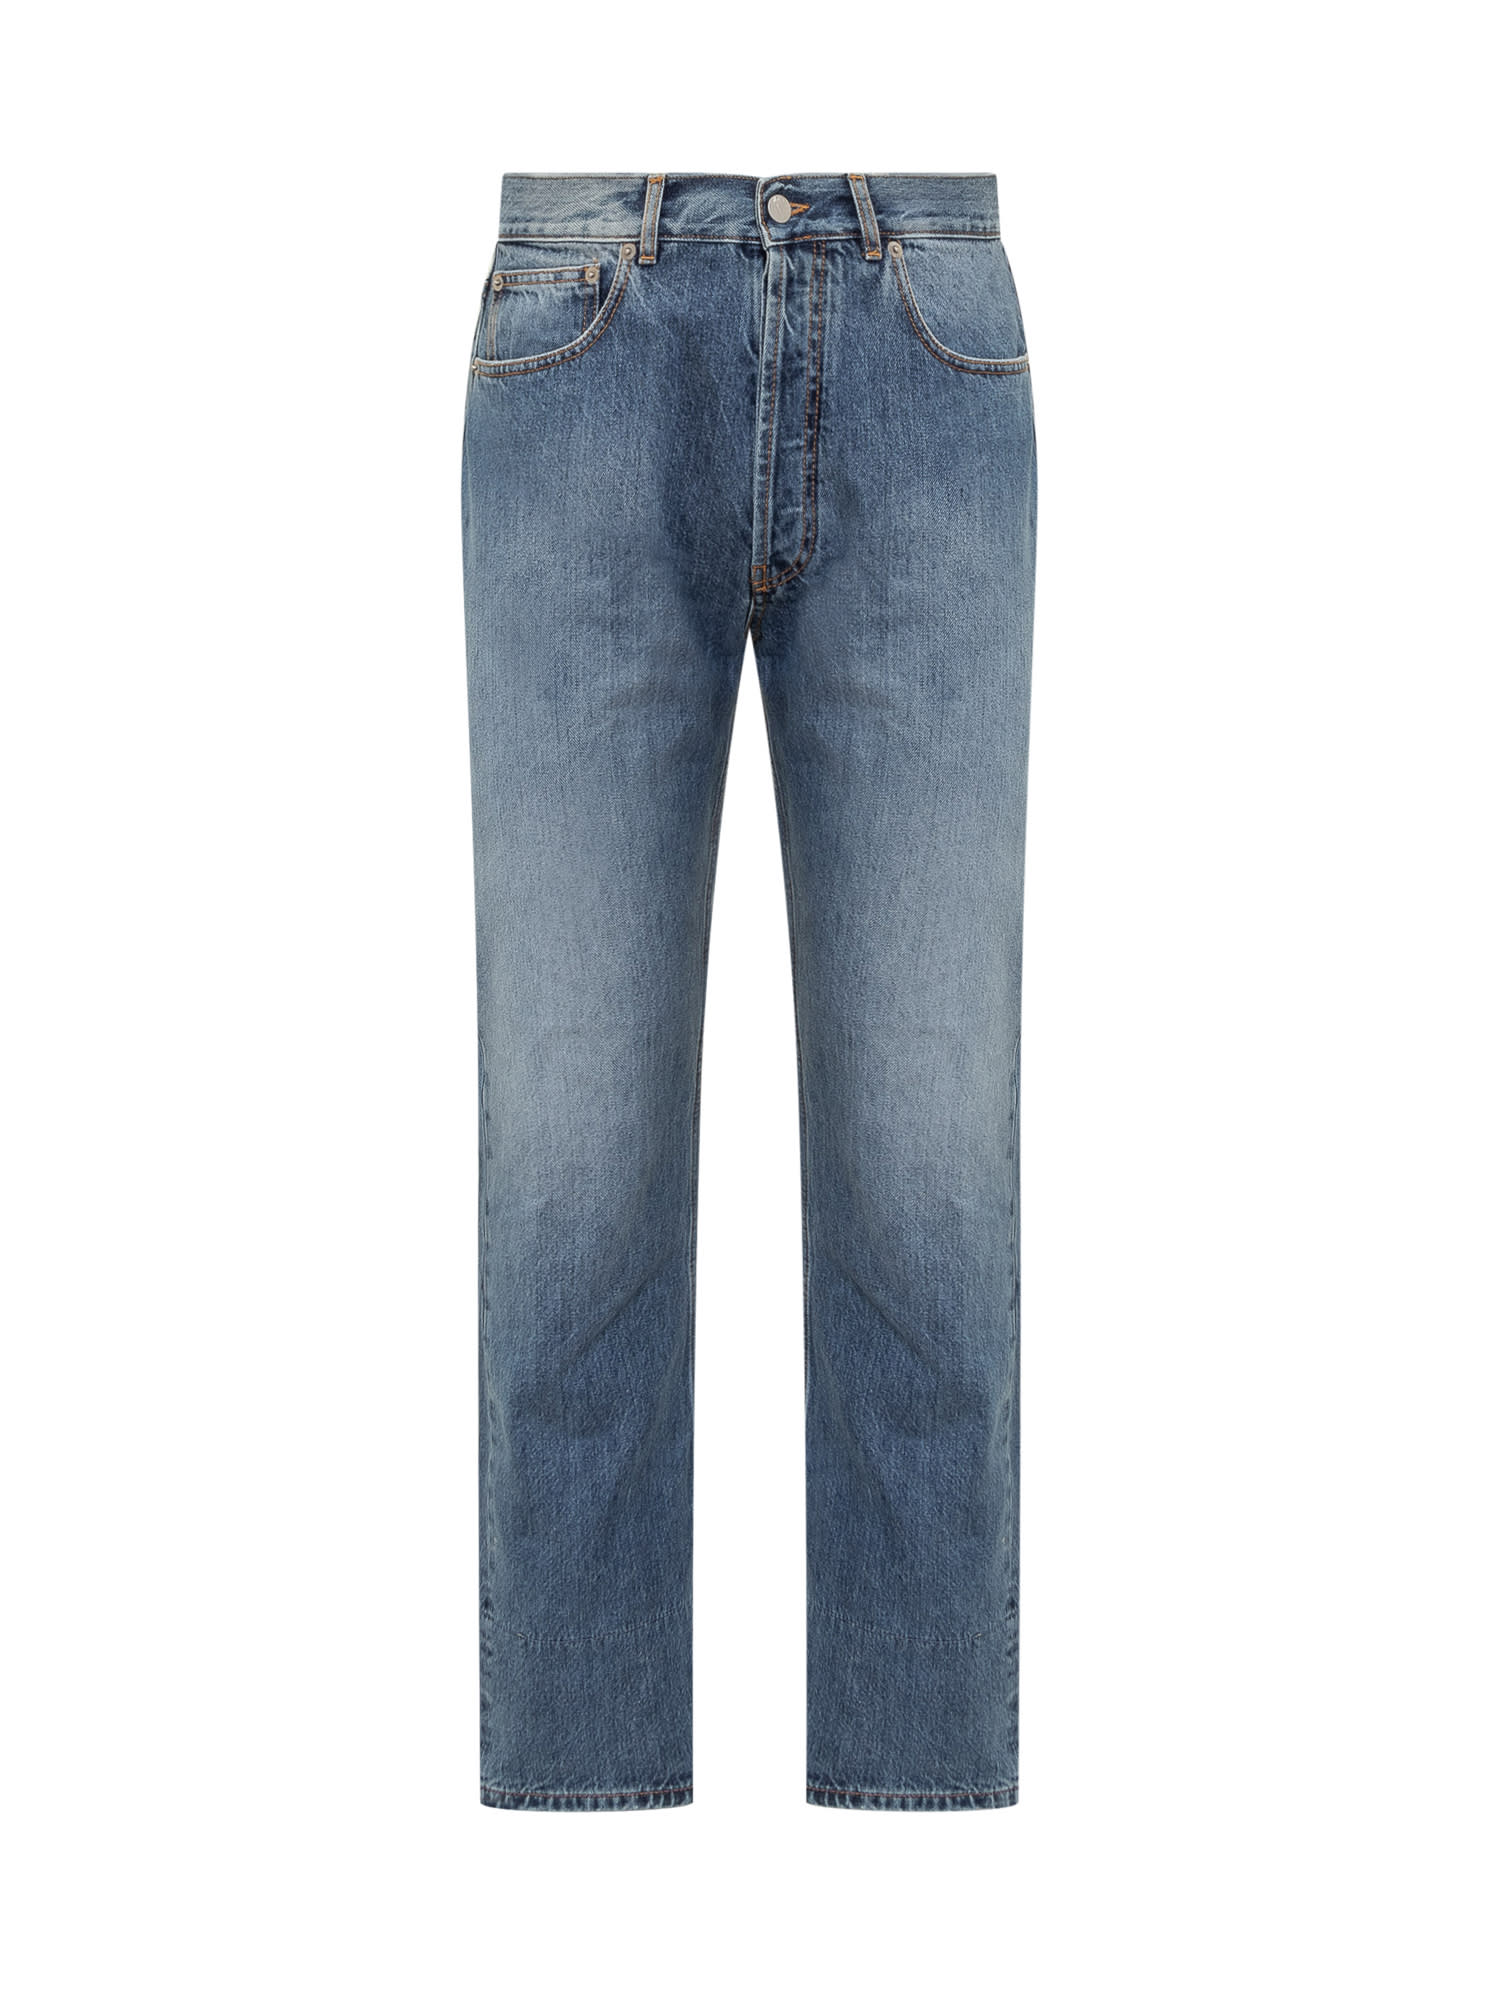 Nick Fouquet Jeans With Embroidery In Dark Blue